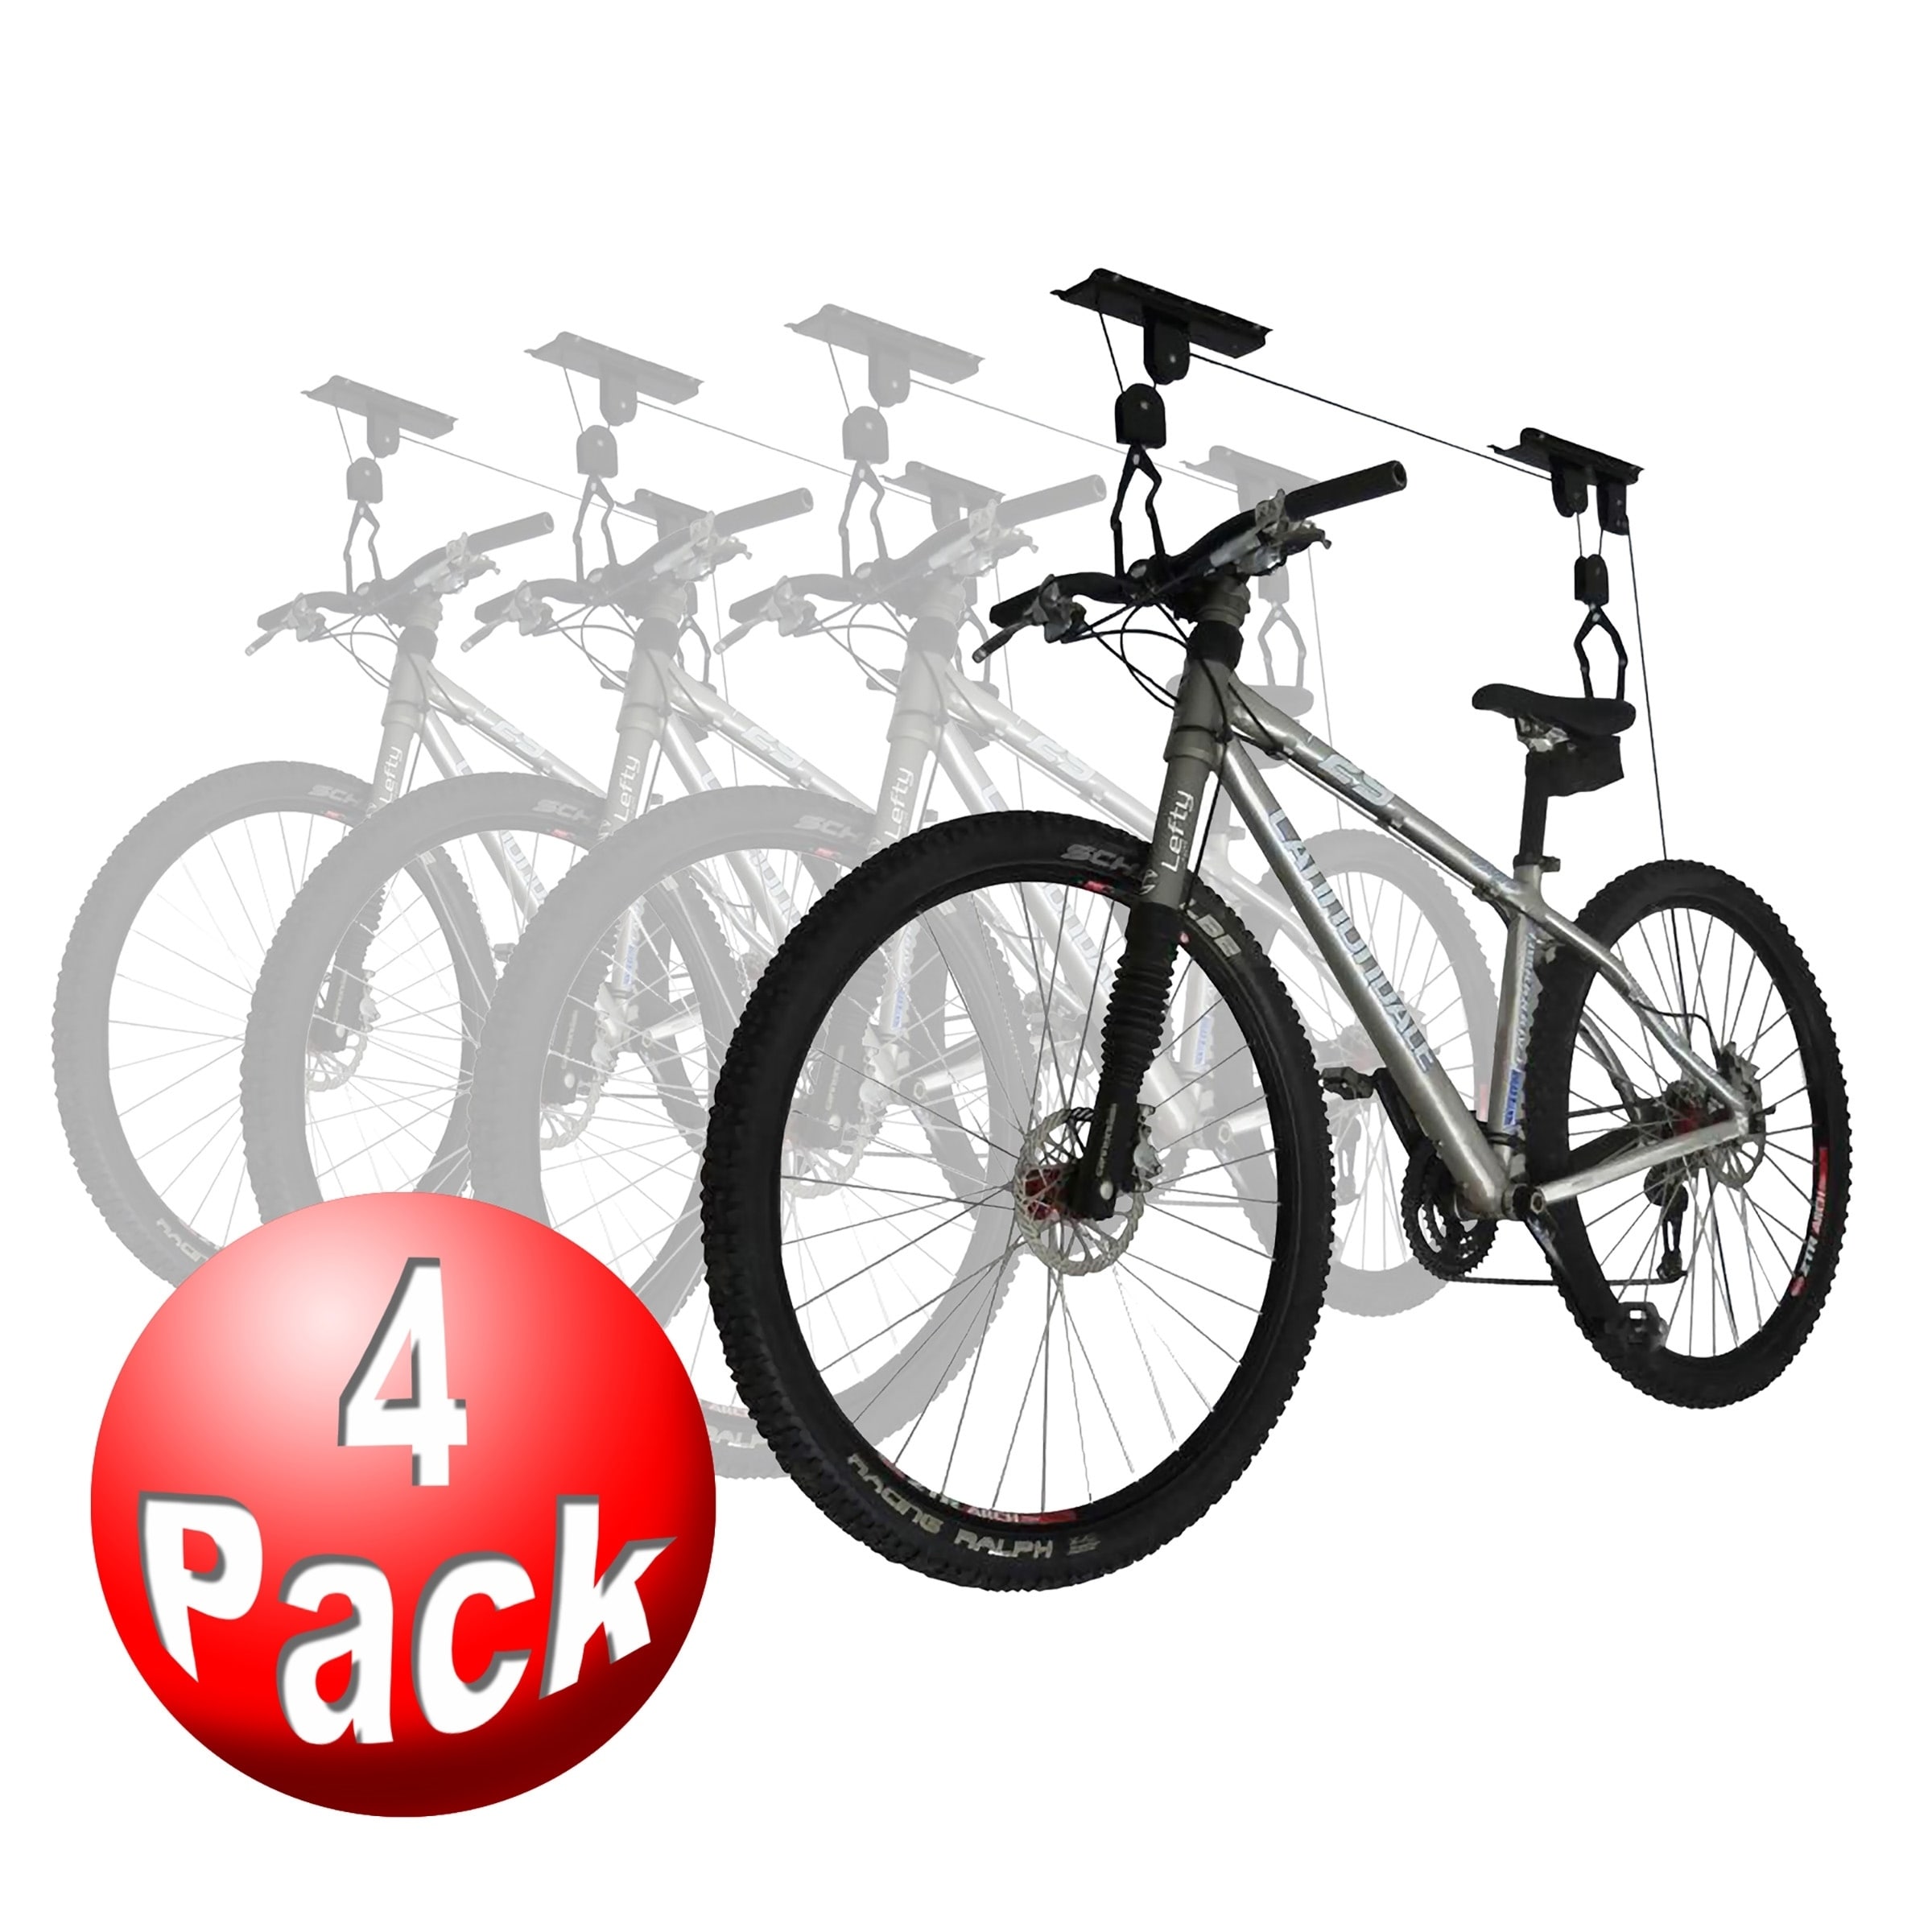 RAD Cycle Products Bicycle Hoist Quality Garage Storage Bike Lift 4 Pack for sale online